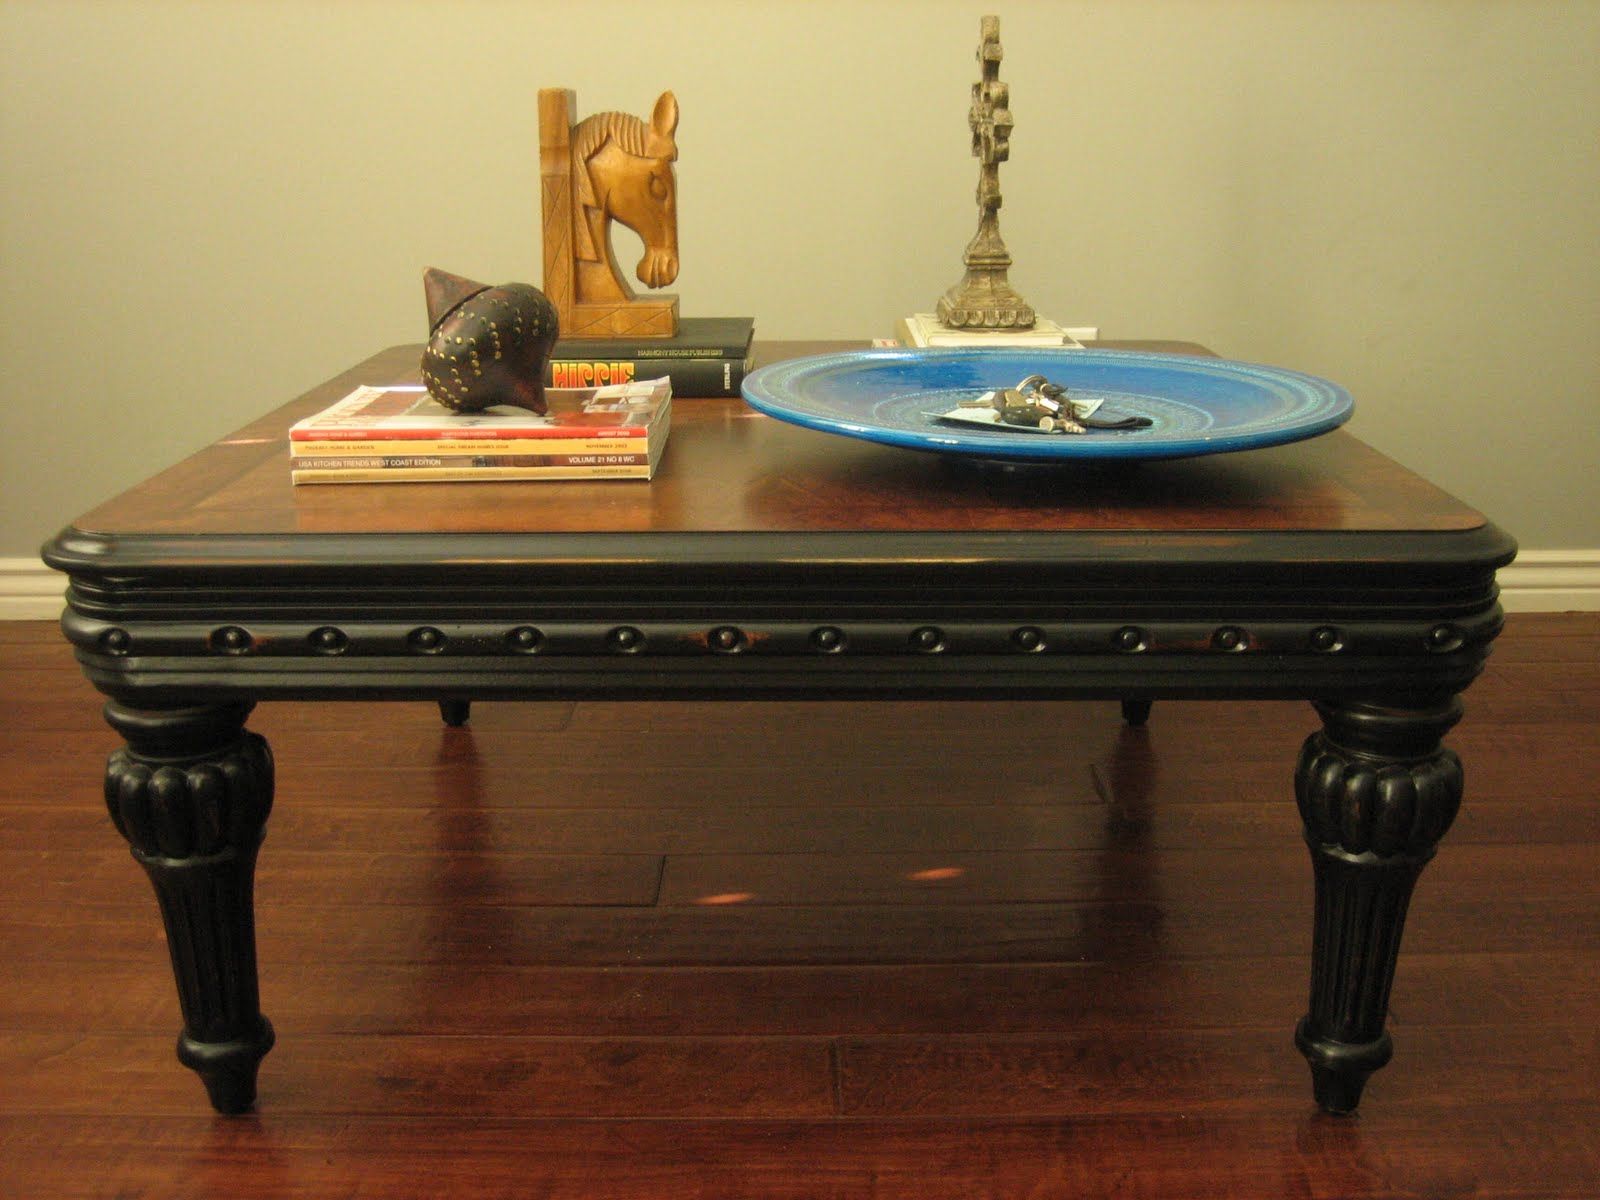 Distressed Black Coffee Table Distressed Black Coffee Table Is A Part Of Distressed Coffee Table Giving Outdated Looks (View 2 of 10)